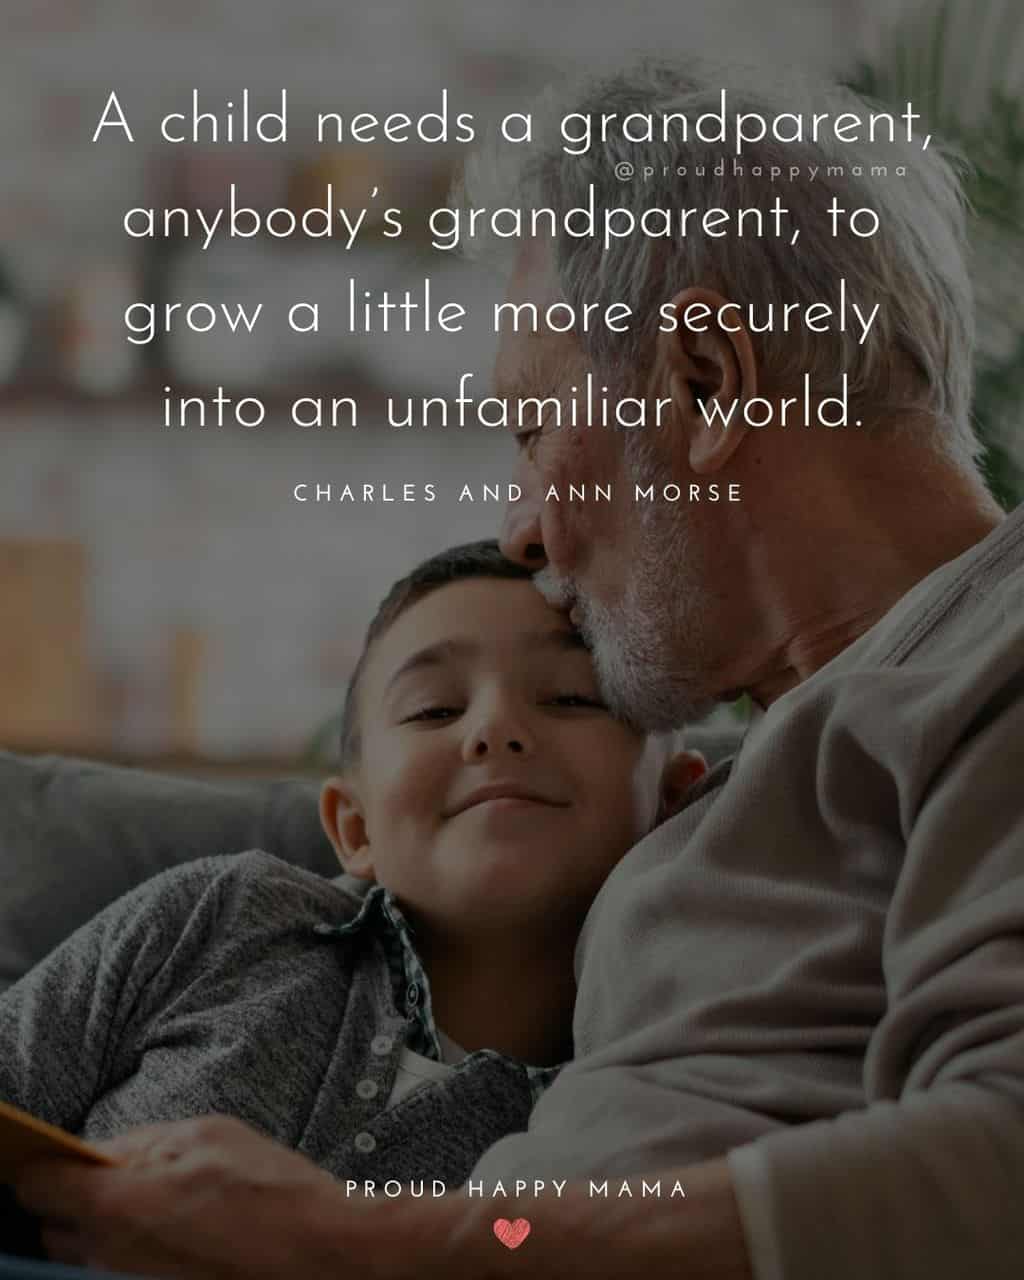 Grandparent Quotes – A child needs a grandparent, anybody’s grandparent, to grow a little more securely into an unfamiliar